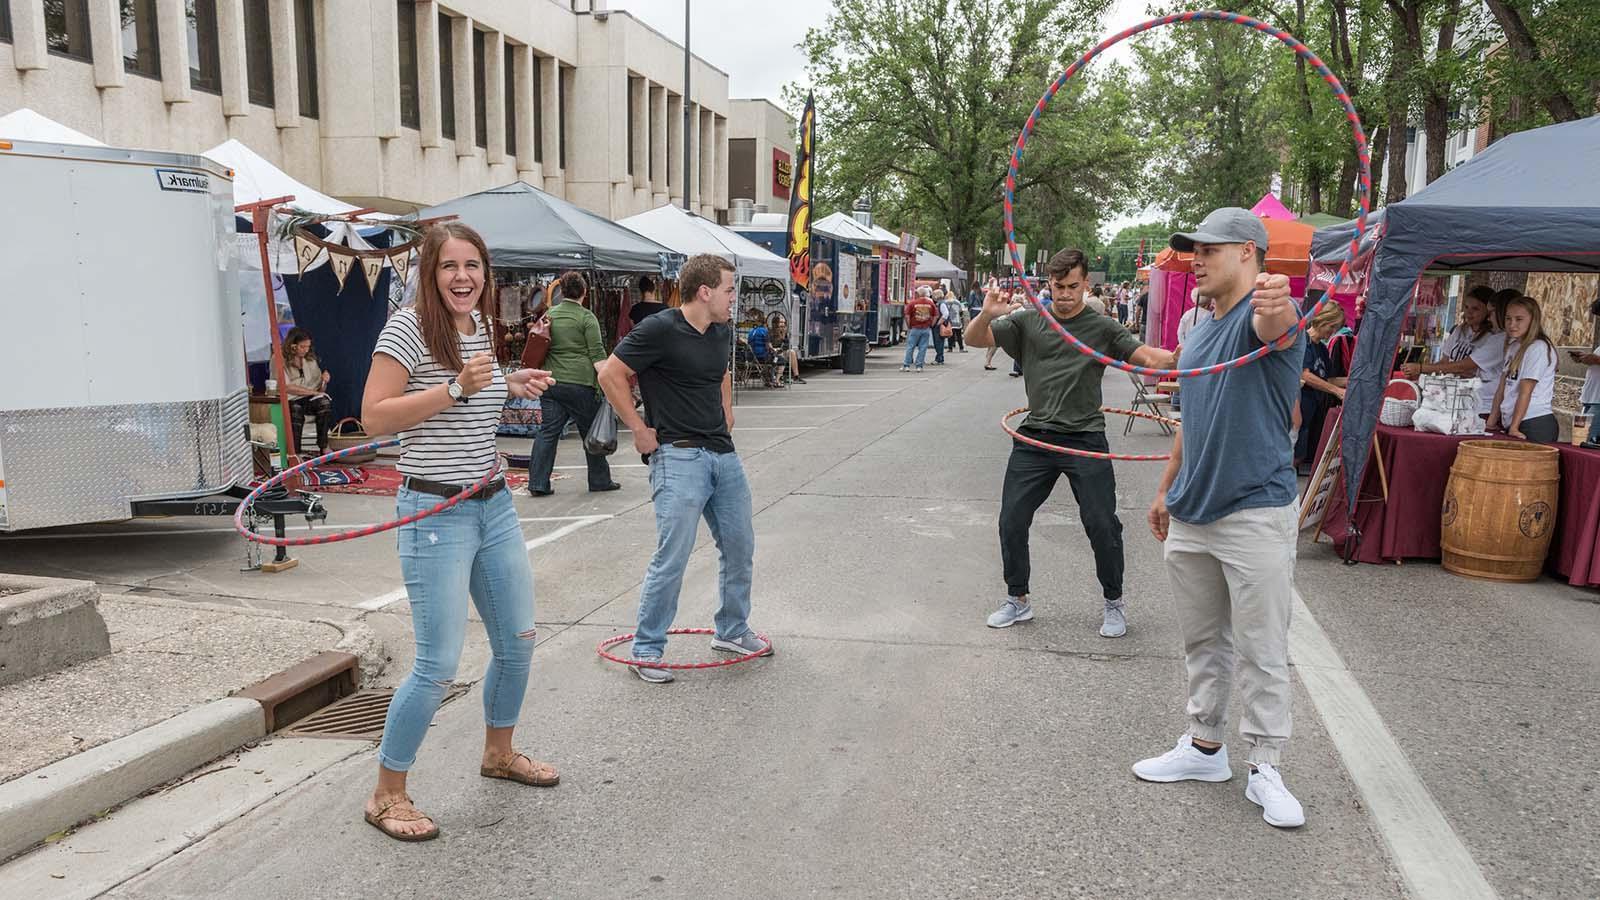 Group of University of Mary students hula hooping at downtown Bismarck street fair